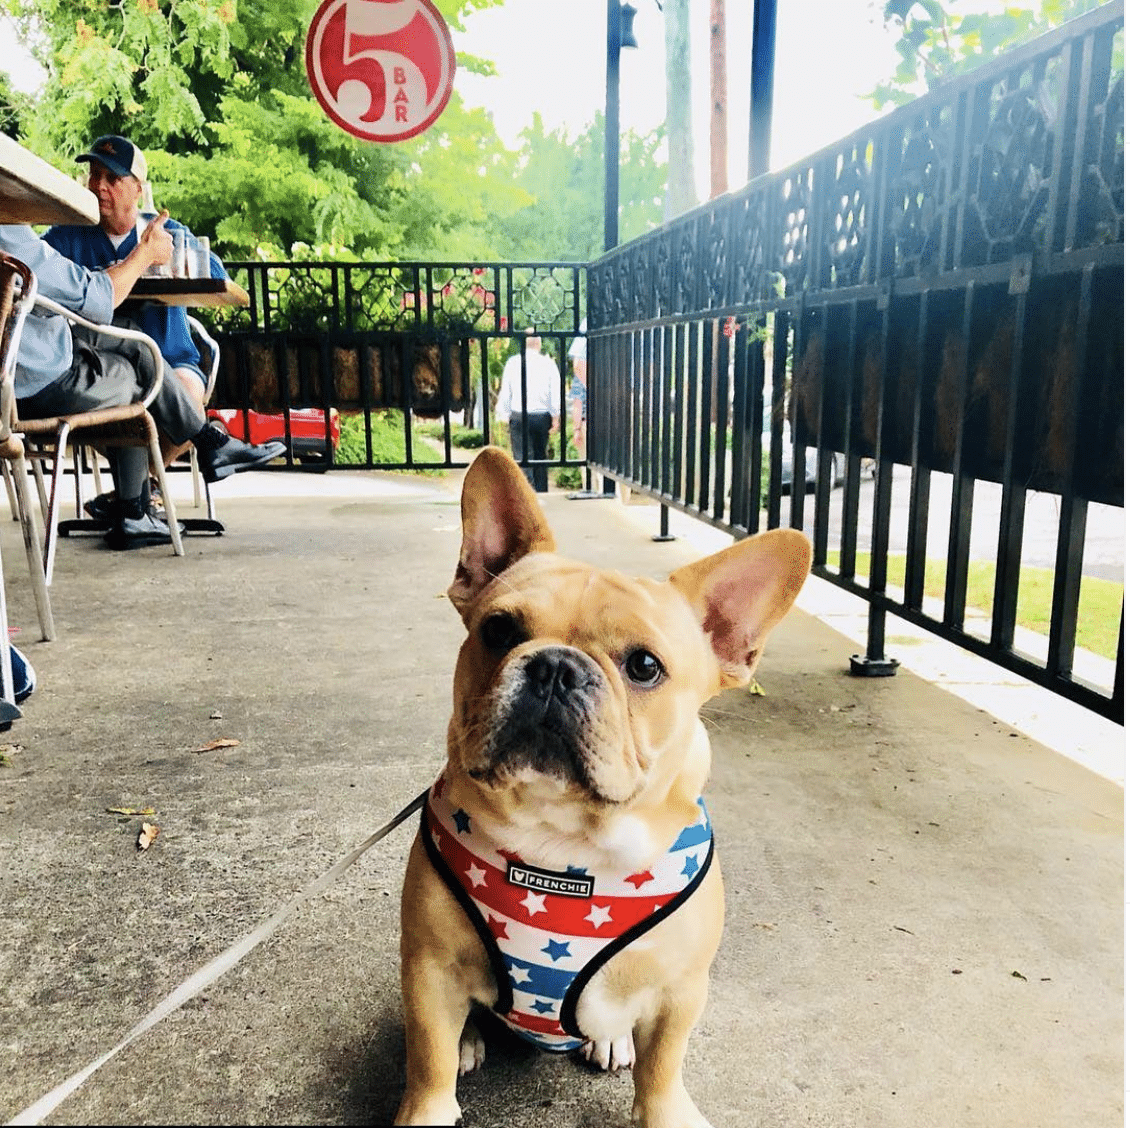 FIVE dog The Alabama legislature is 1 vote away from allowing dogs on restaurant patios